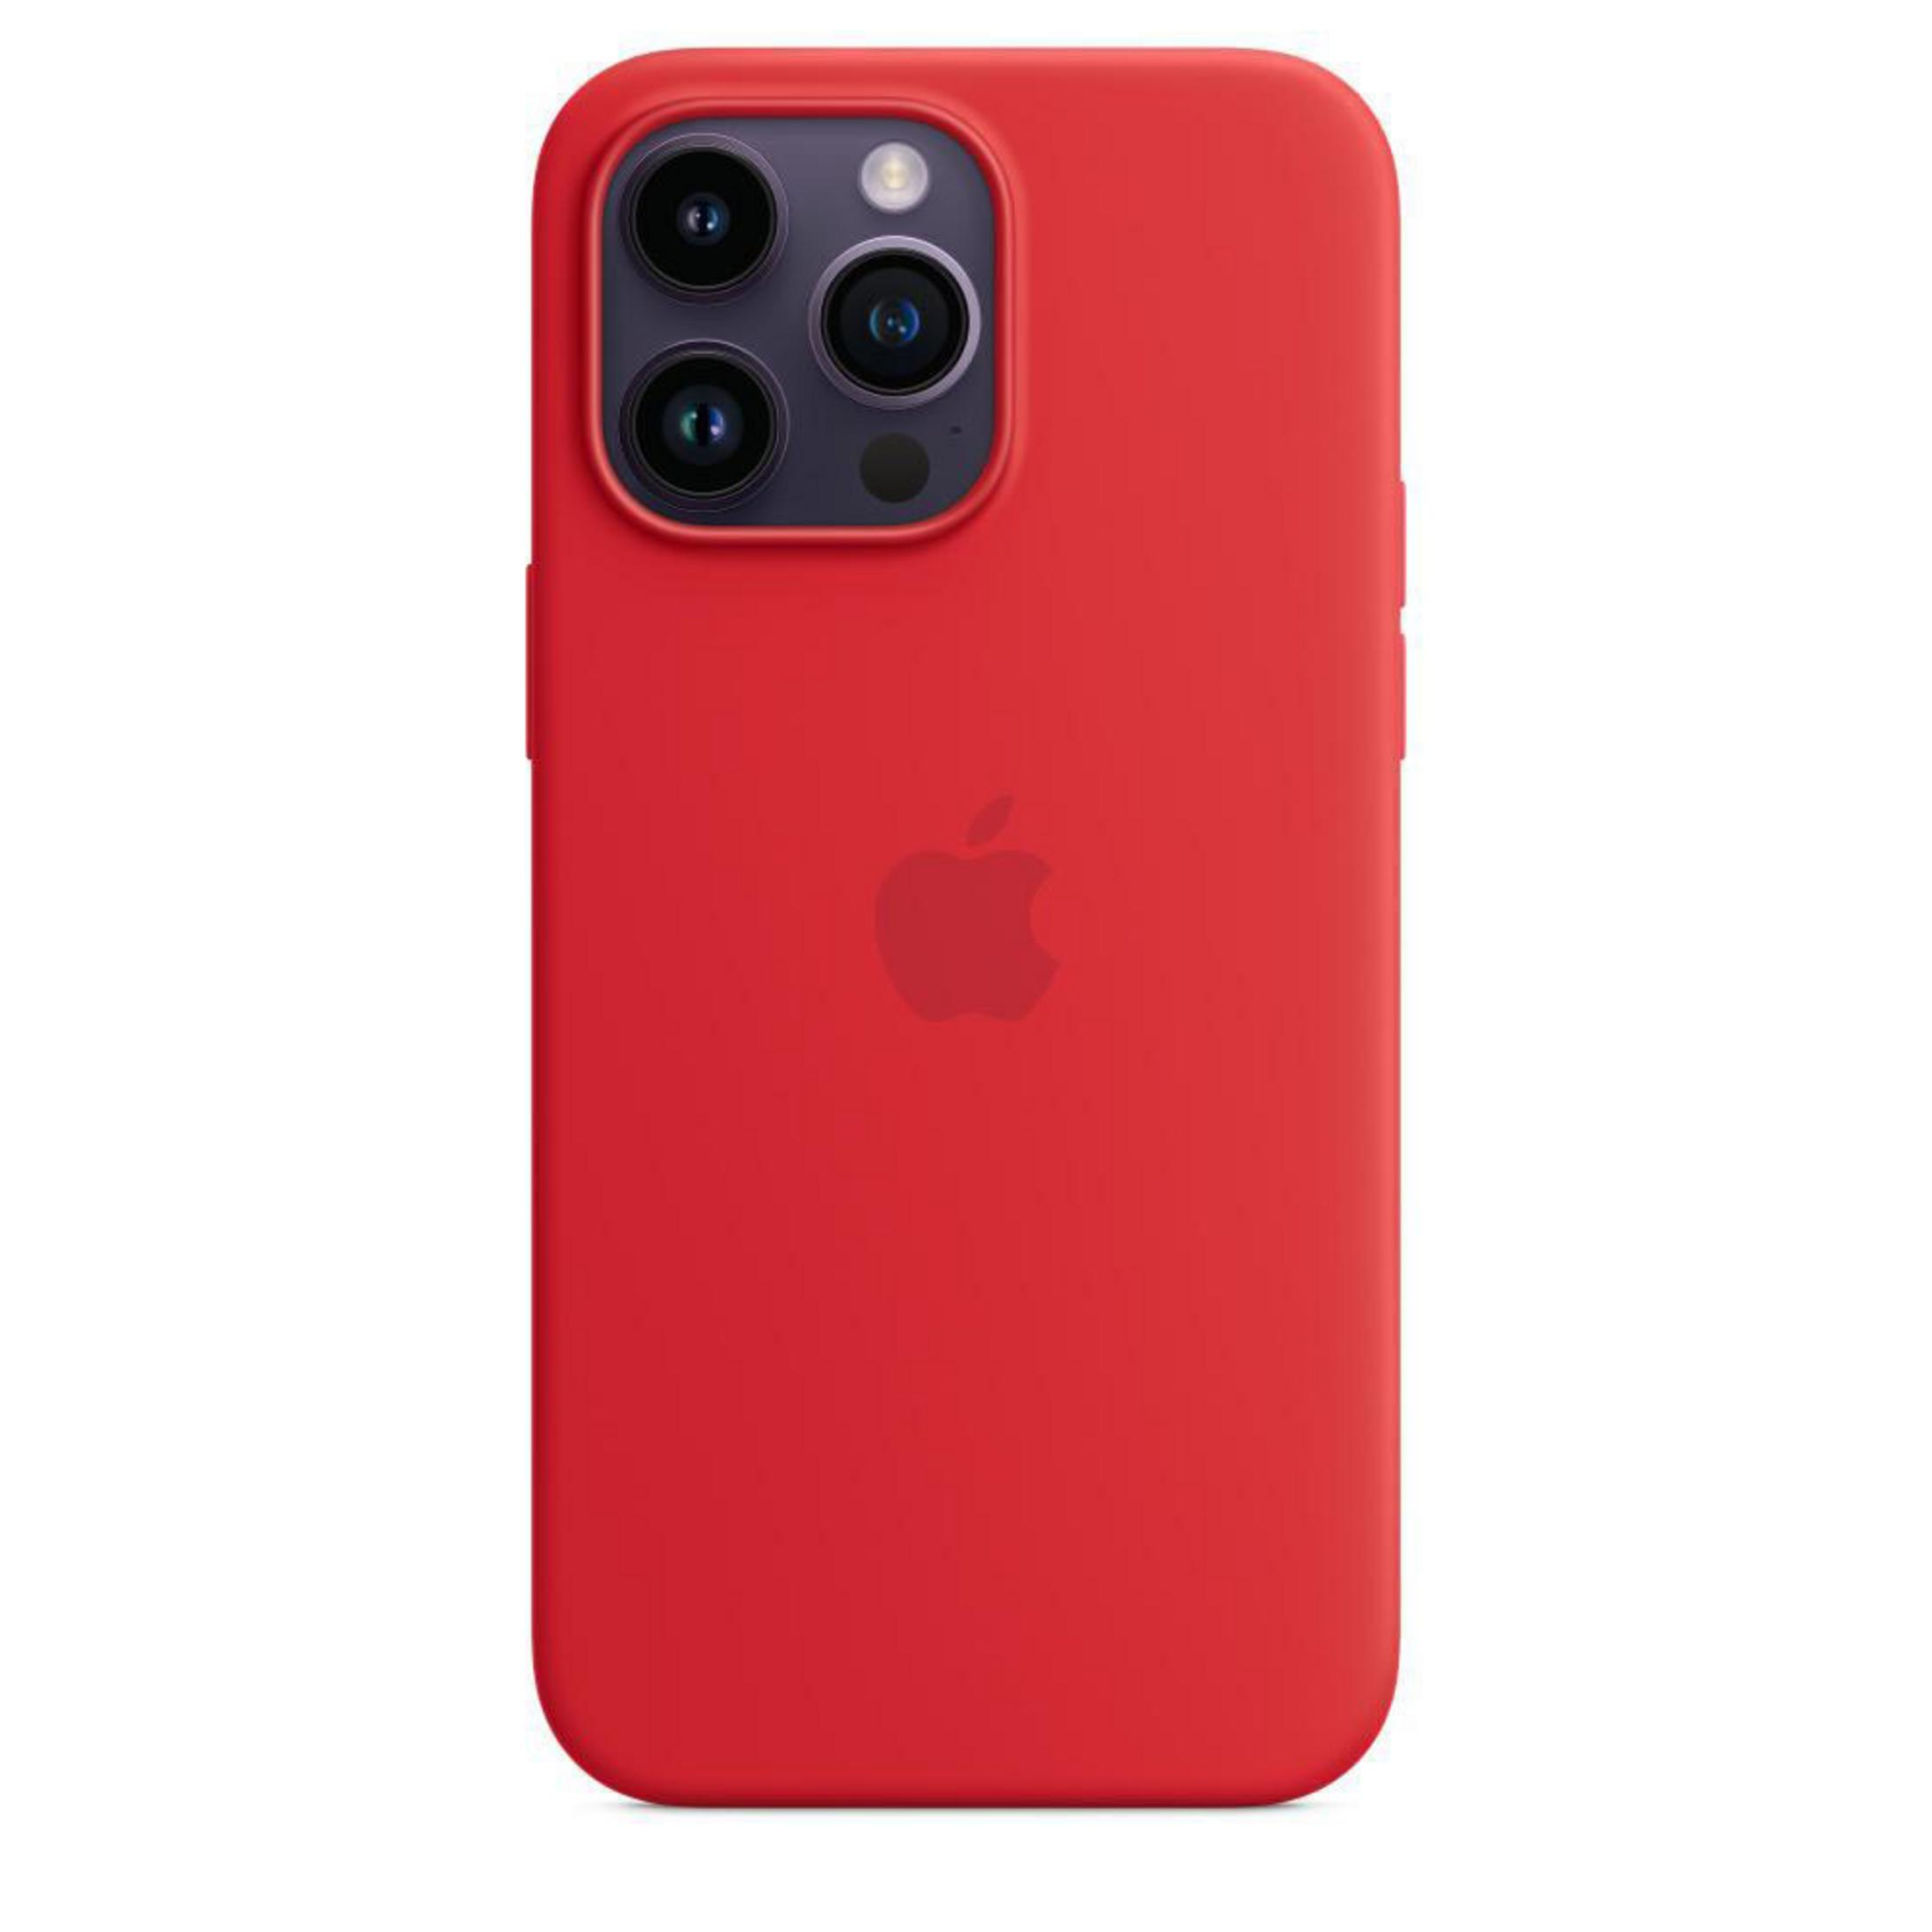 MS 14 Max, SIL Backcover, Pro RED, IP14PROMAX CASE Apple, iPhone APPLE MPTR3ZM/A (PRODUCT)RED